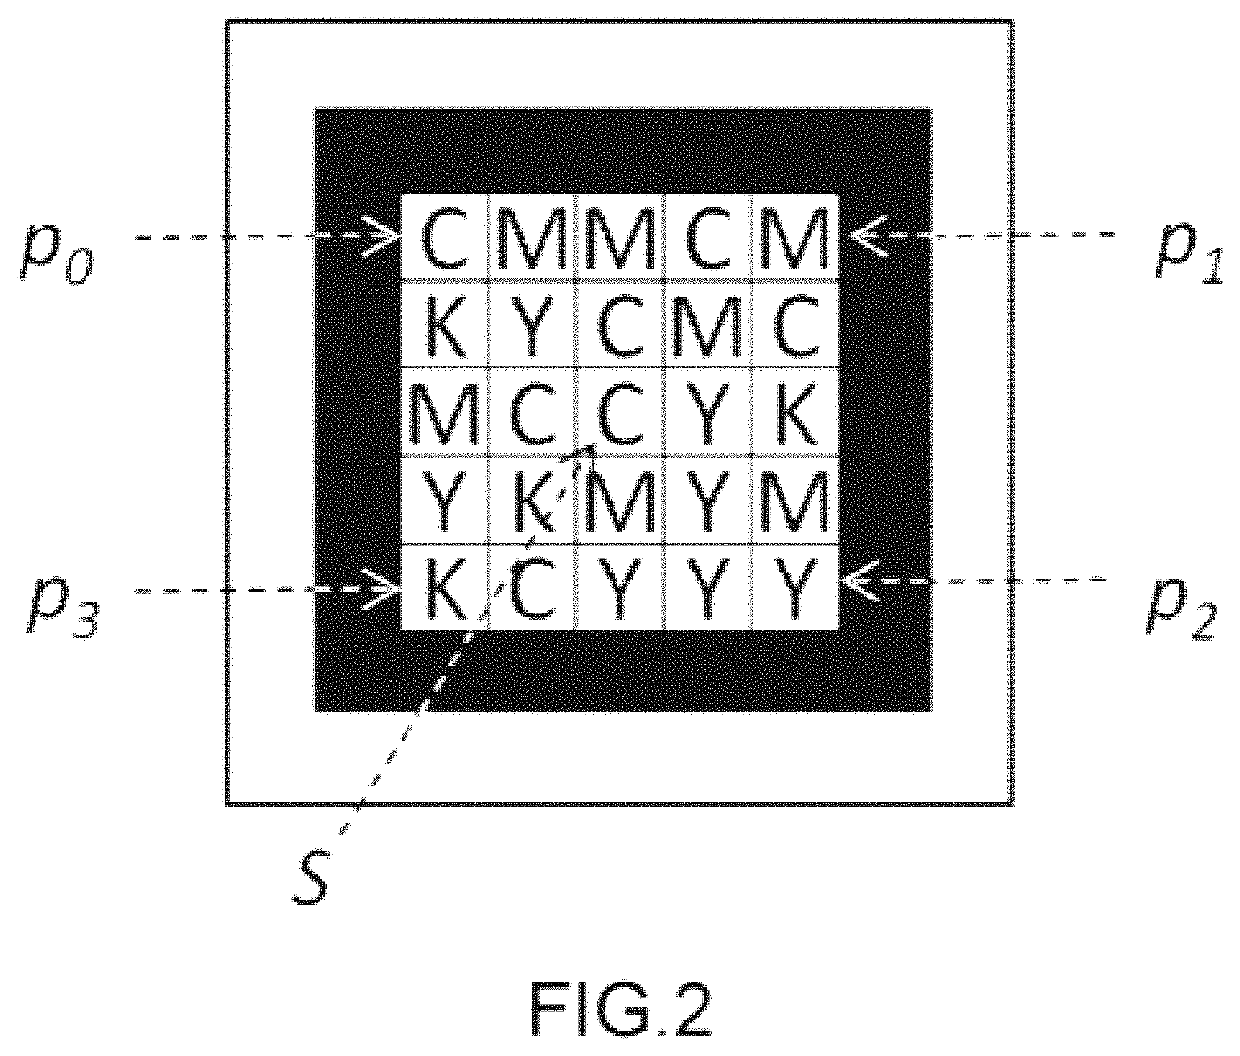 Method for detecting and recognizing long-range high-density visual markers